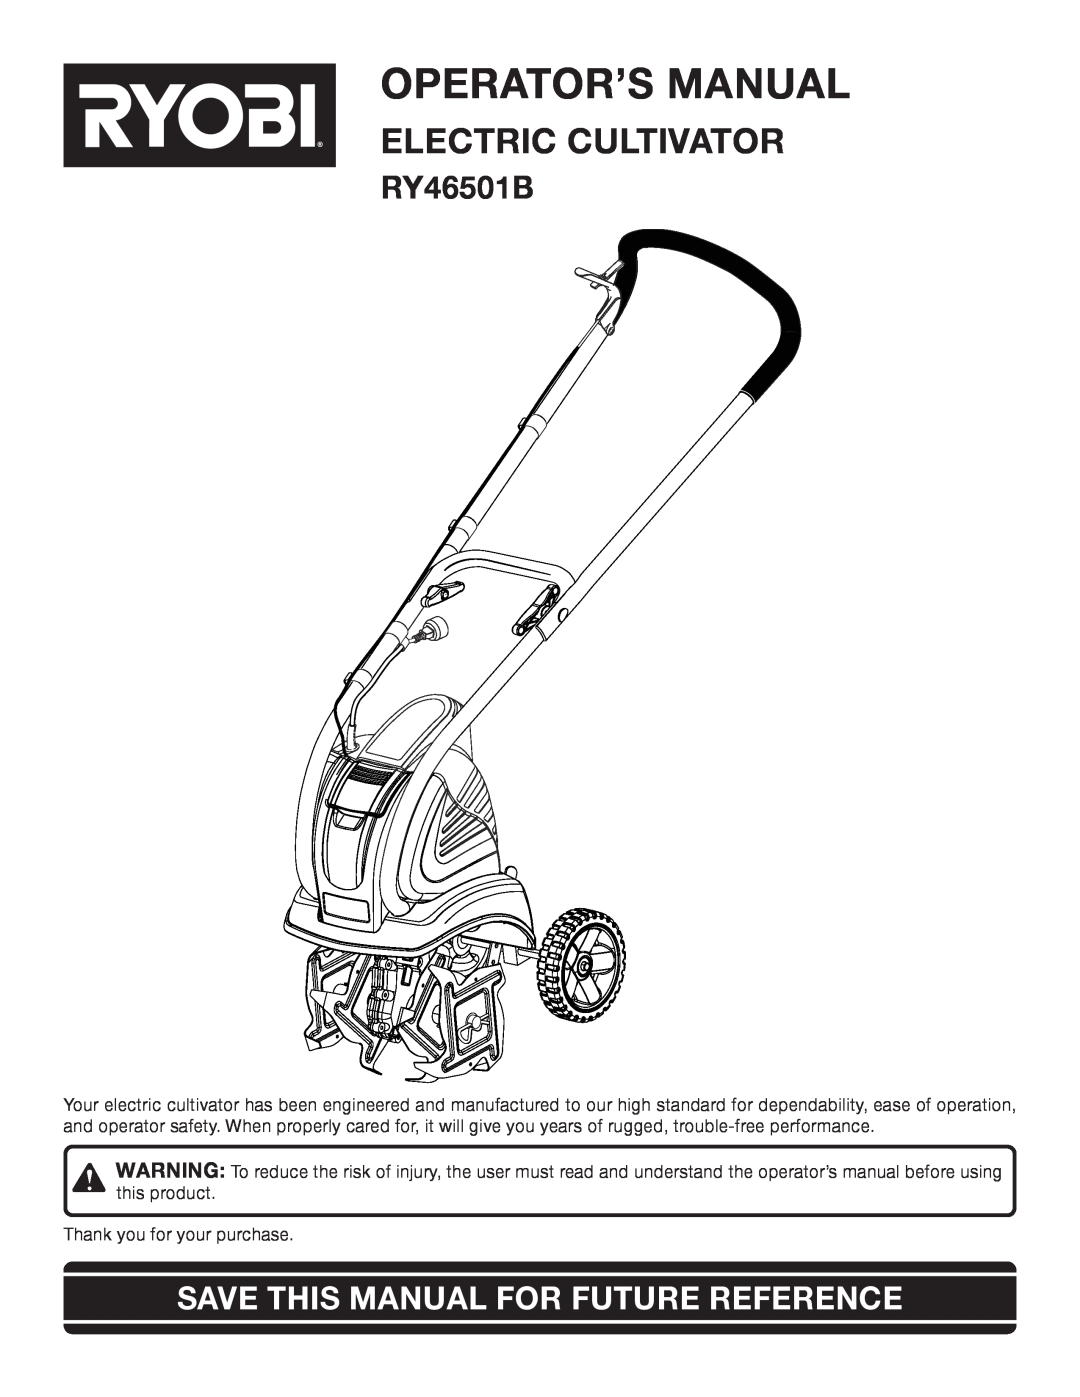 Ryobi Outdoor RY46501B manual Operator’S Manual, Electric Cultivator, Save This Manual For Future Reference 